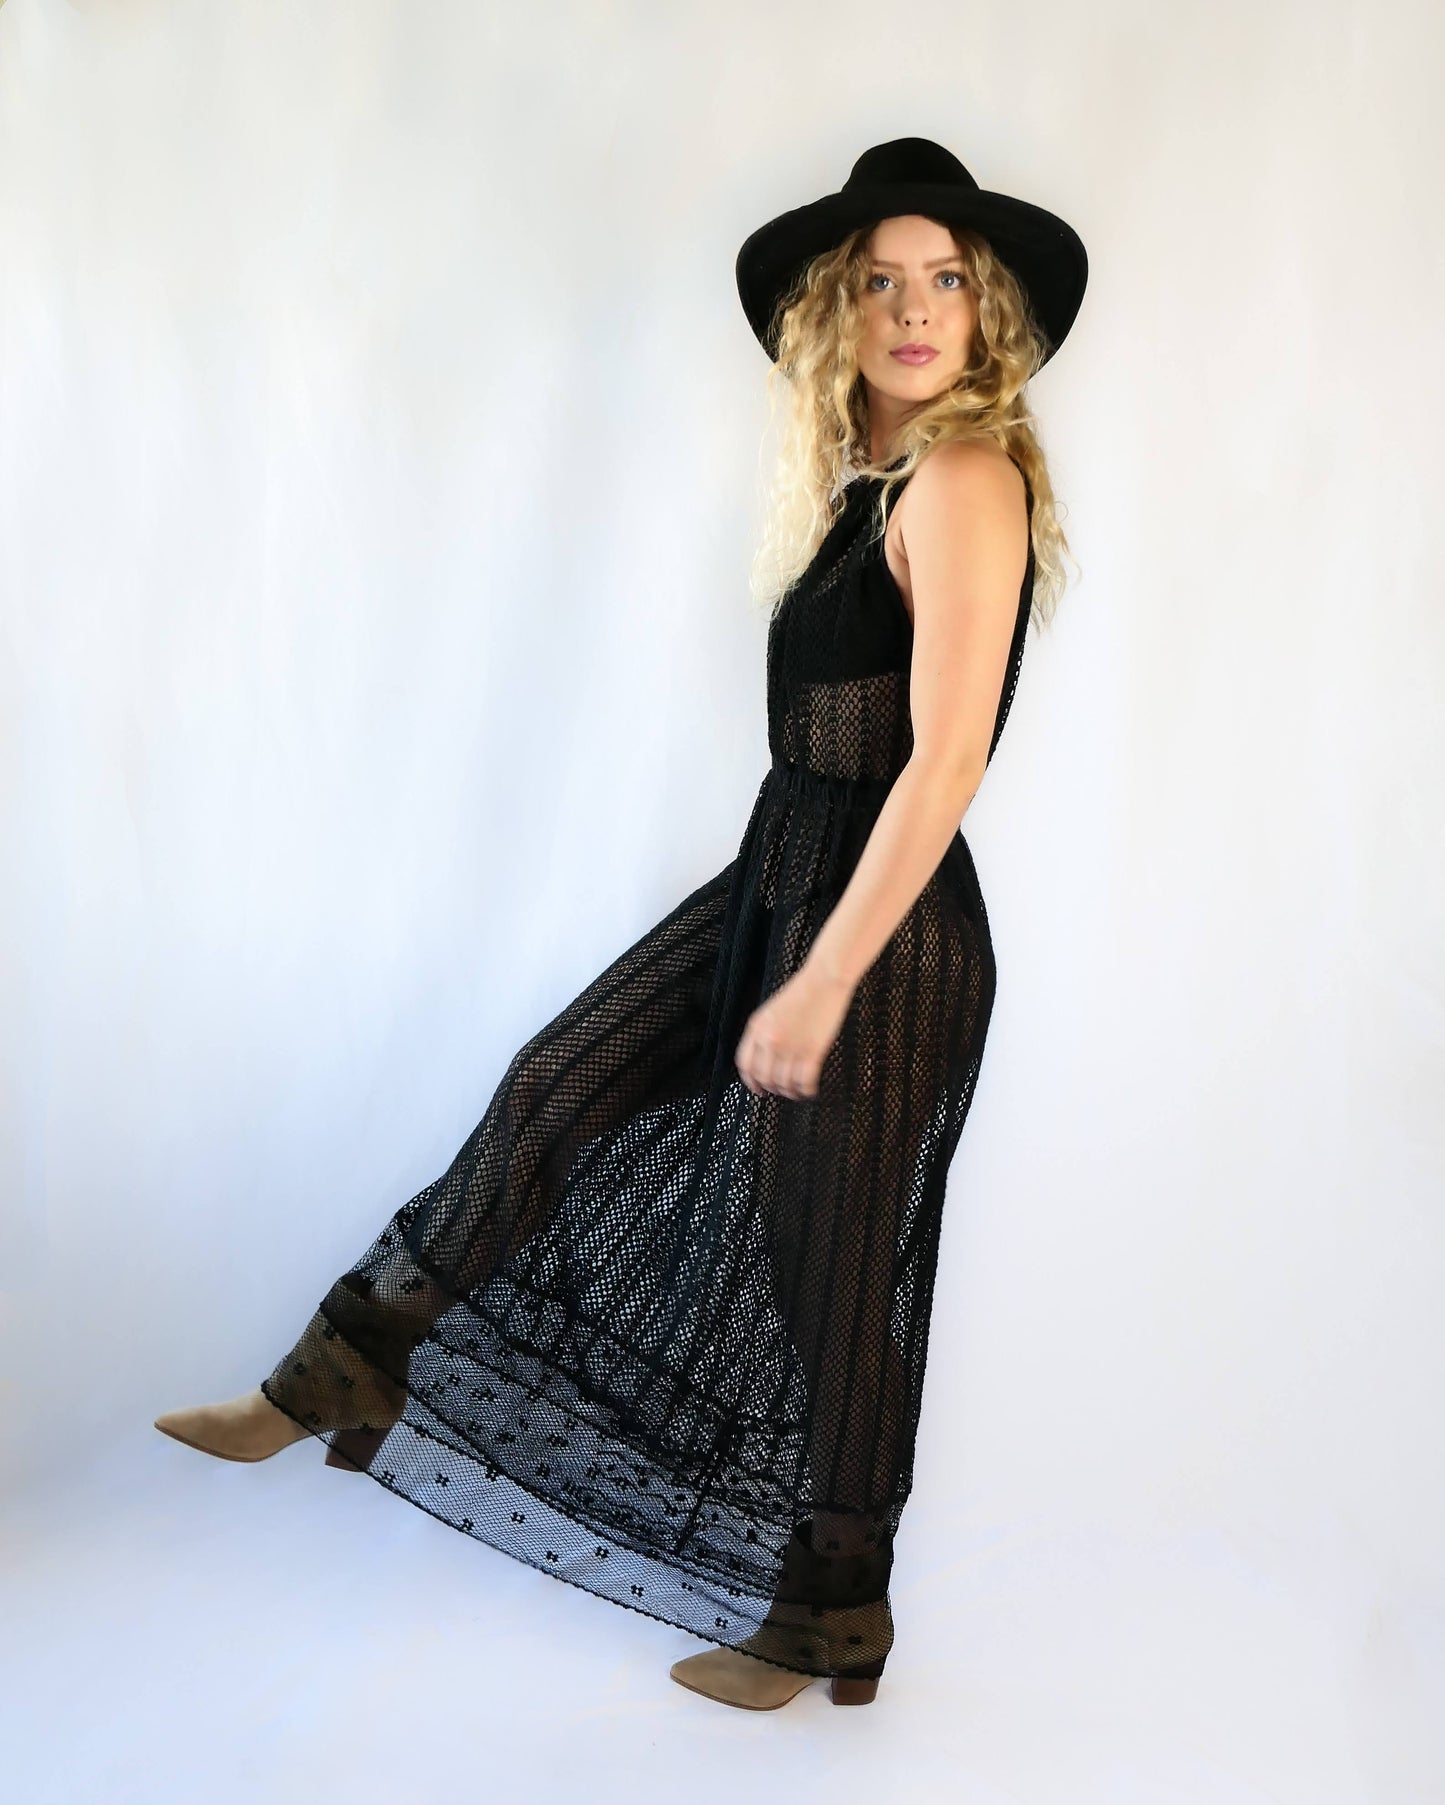 This boho chic dress in black is completely hand crocheted with soft cotton threads, with a Lim’s classic delicate net patterned crochet at the bottom hem.   The dress is worn with the button open at the front for a flattering V-neckline.  